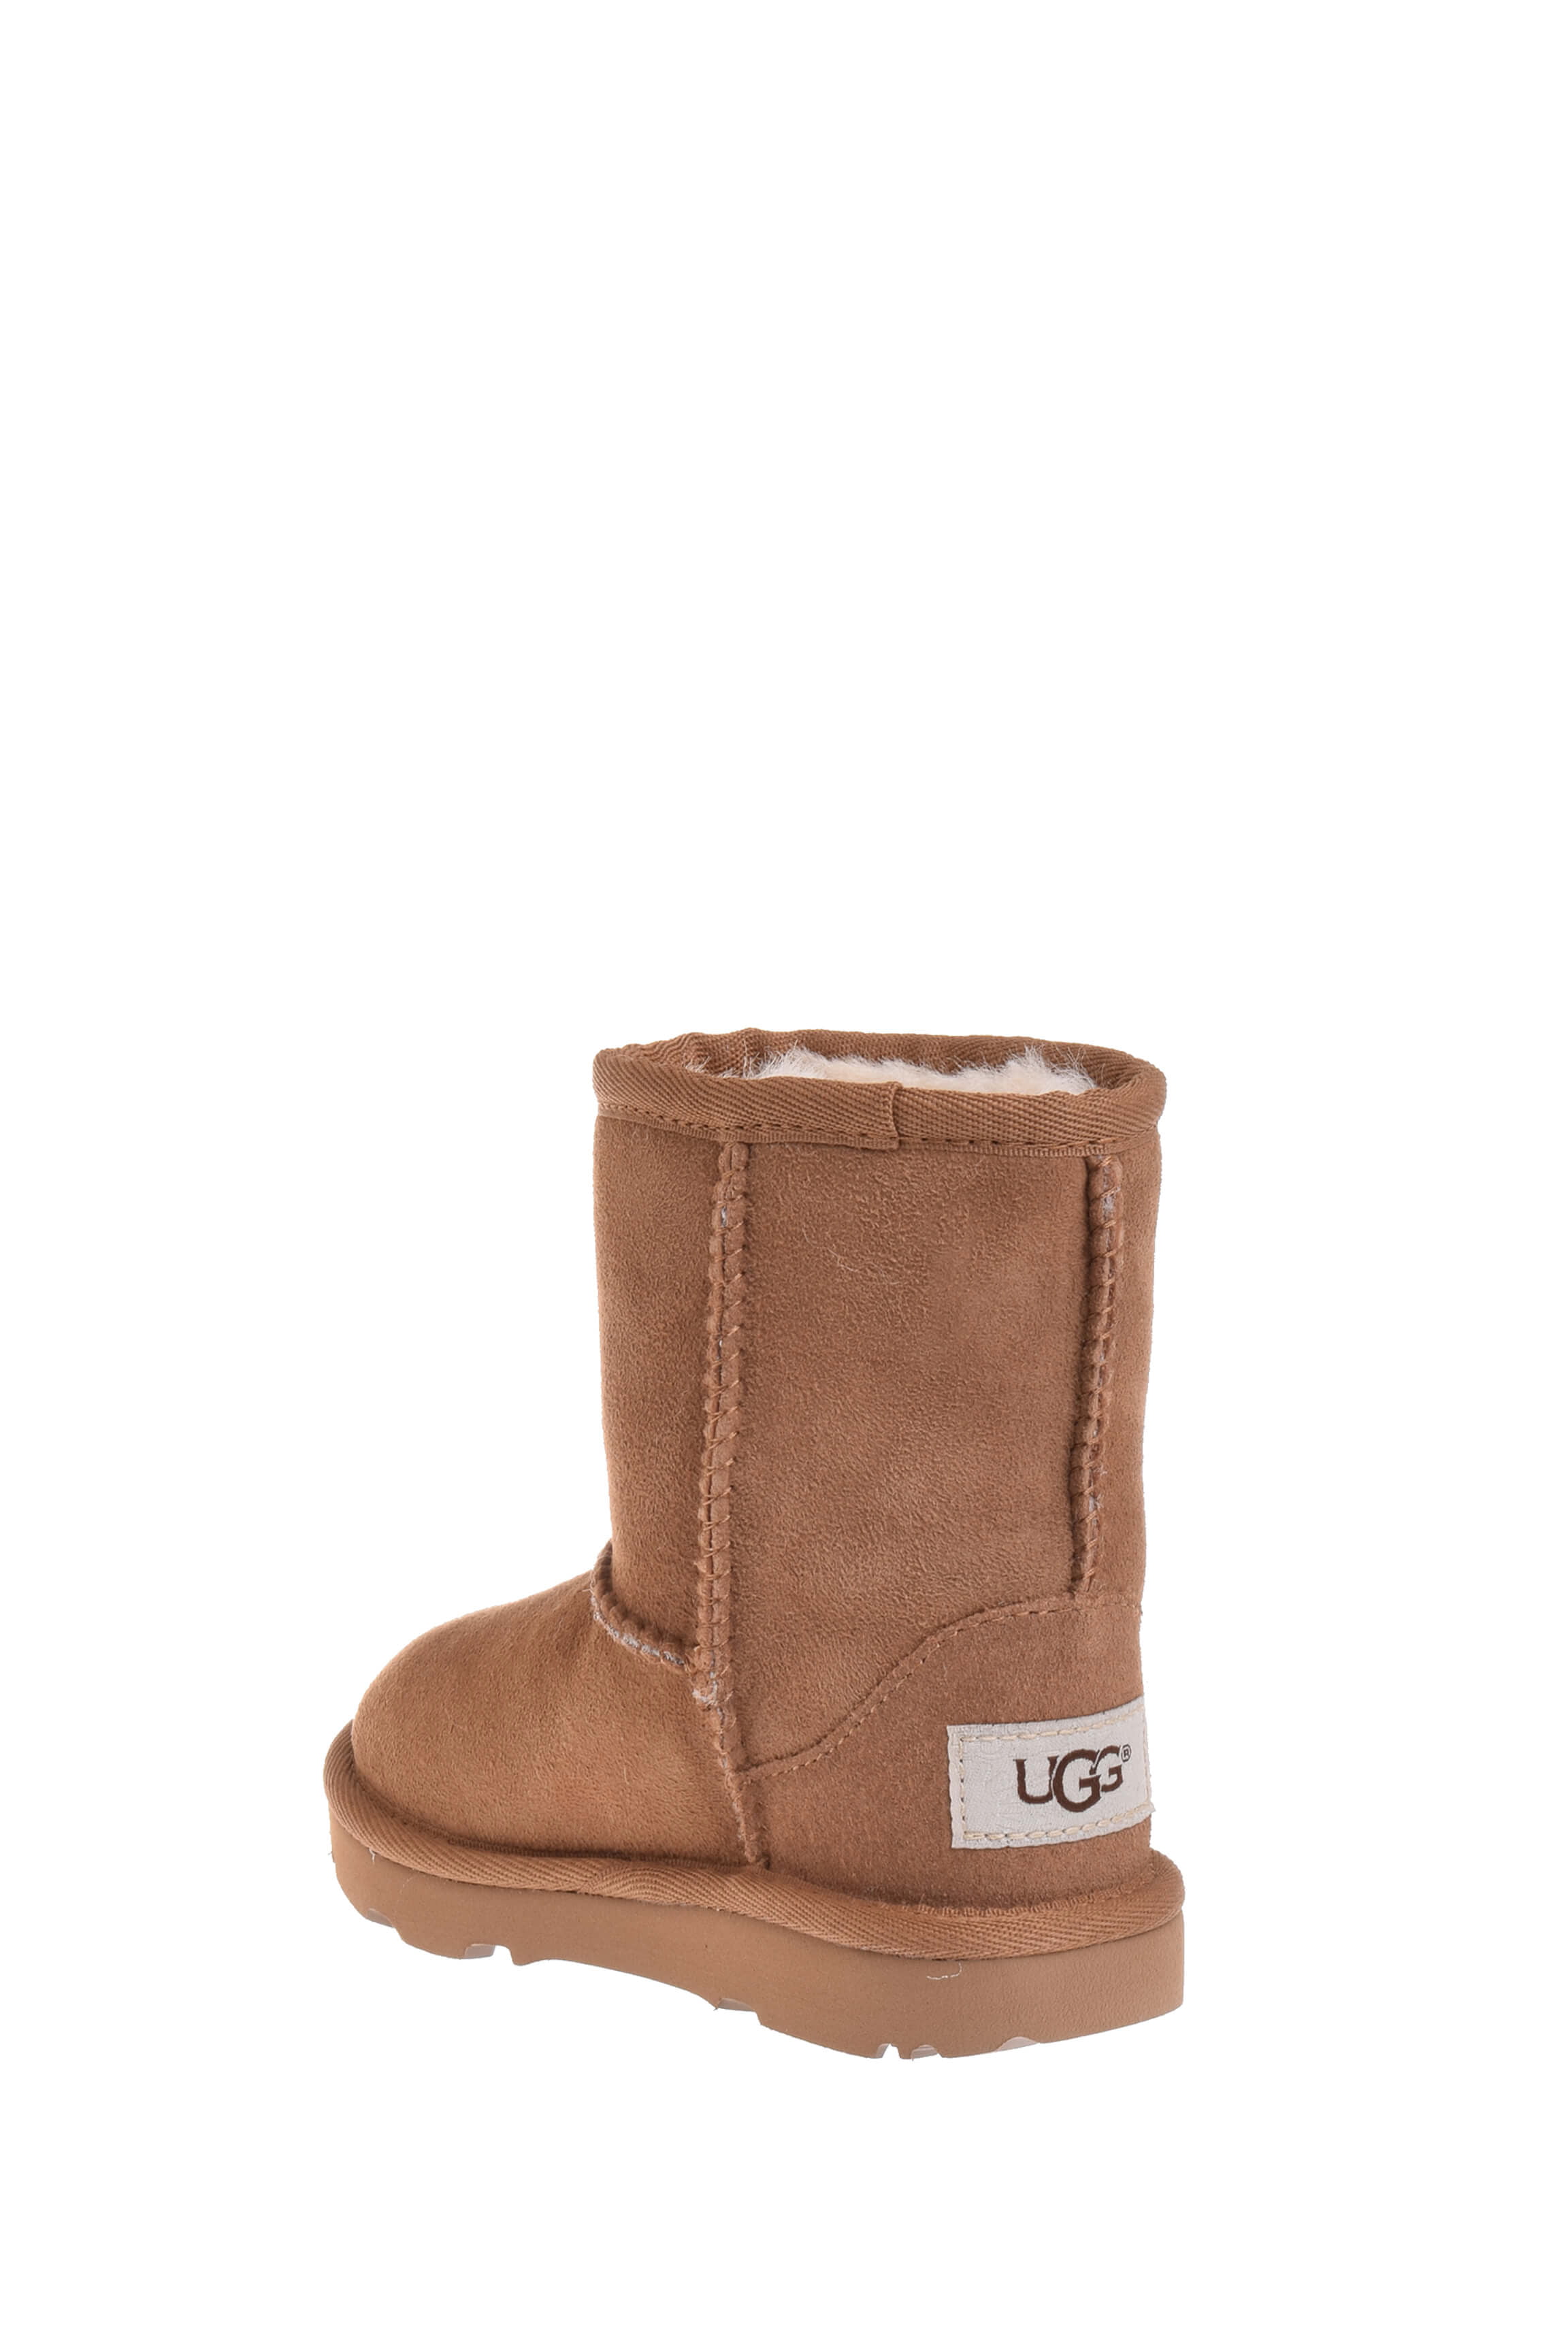 does walmart sell uggs